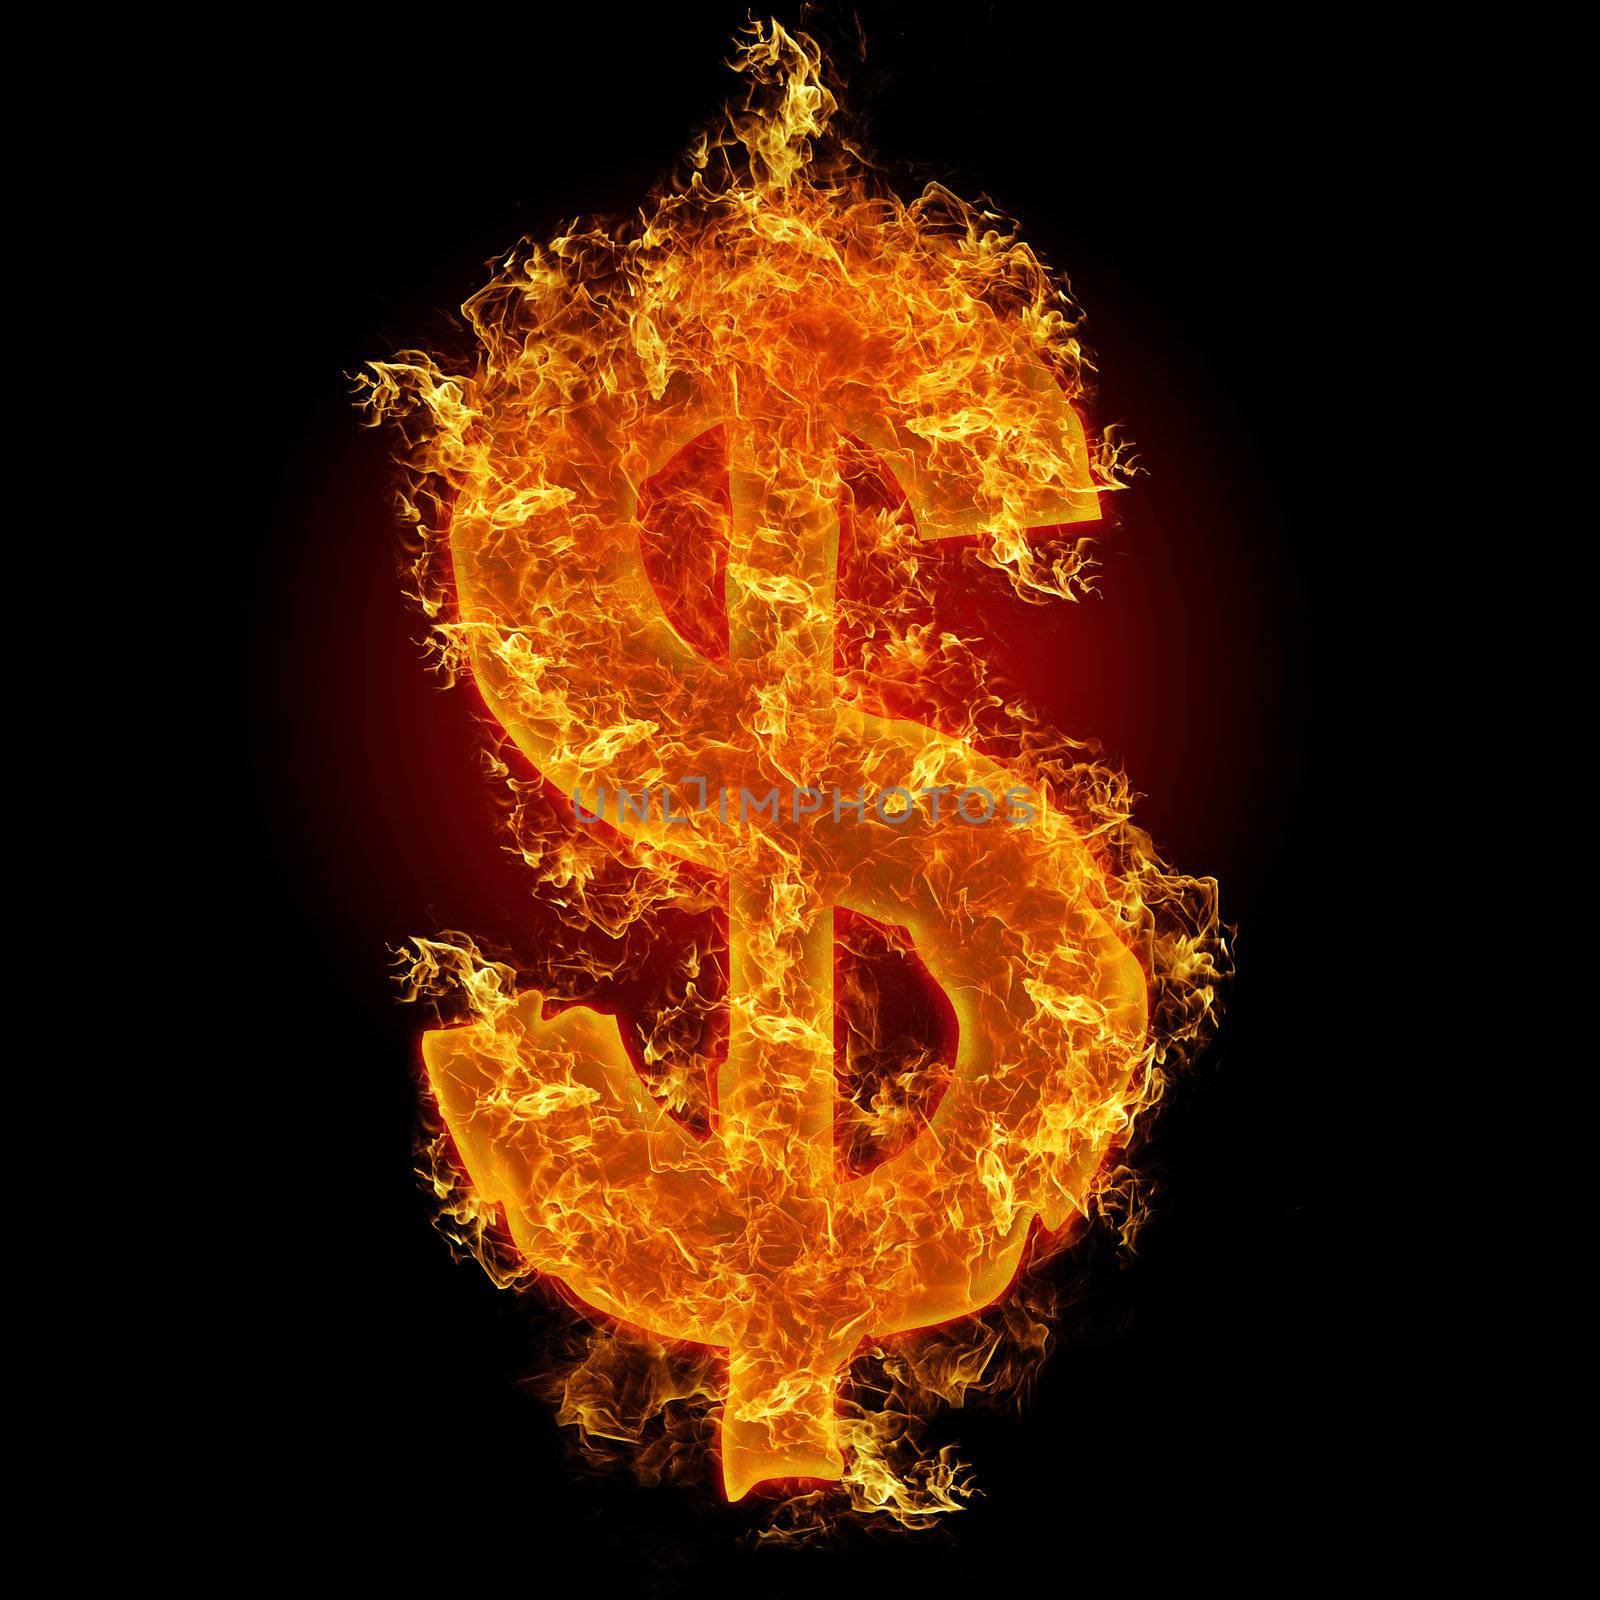 Fire dollar sign by rusak